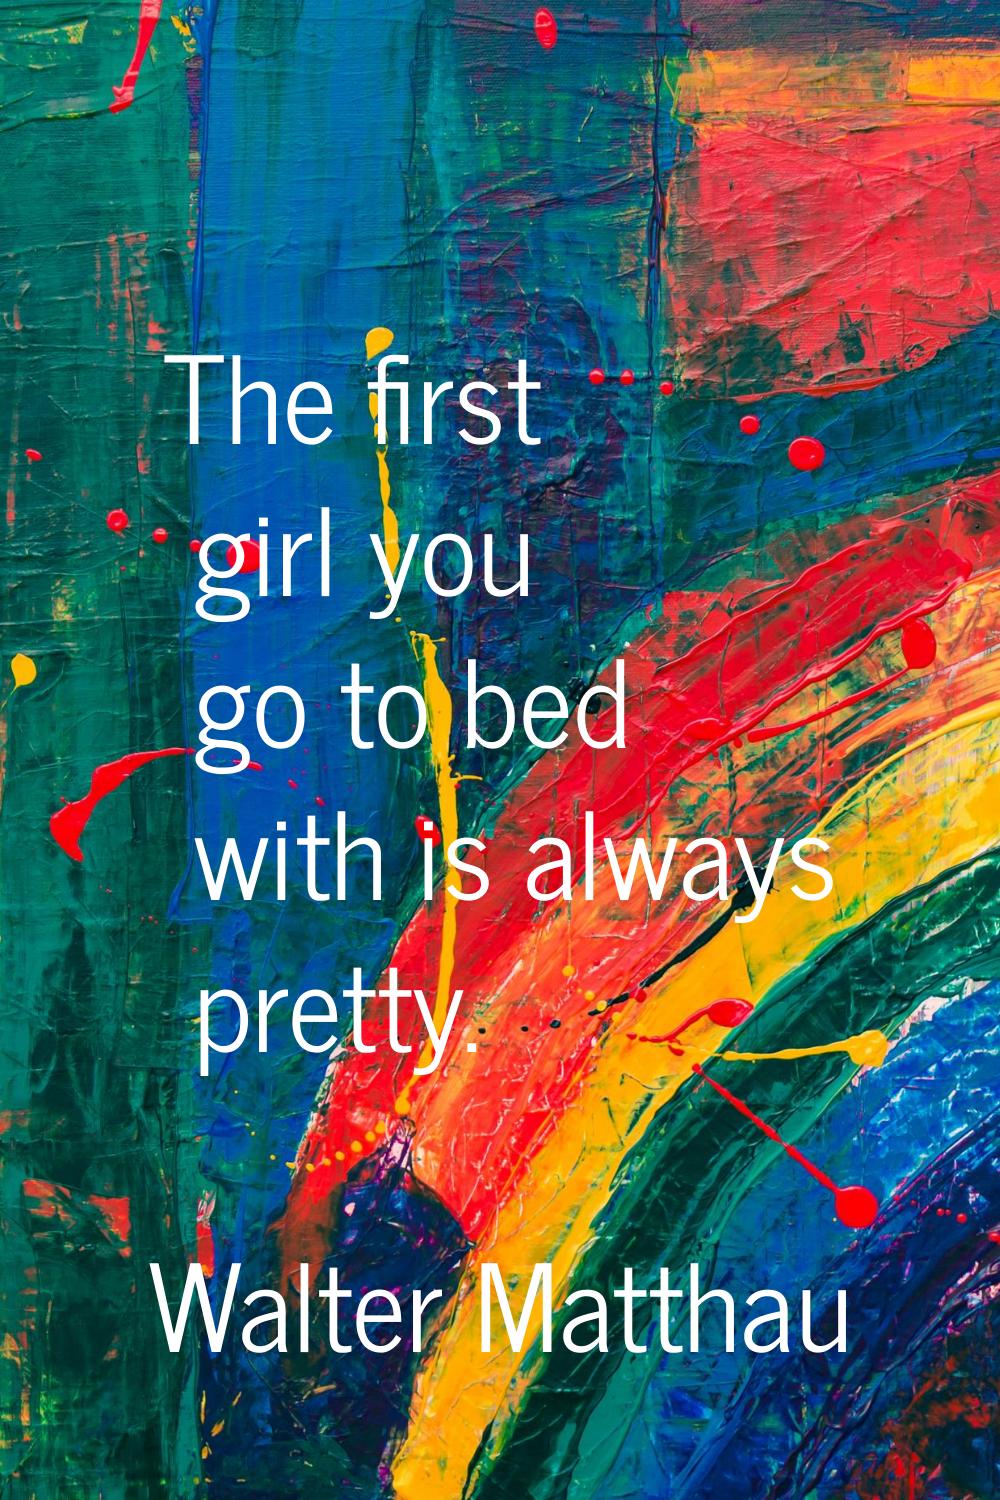 The first girl you go to bed with is always pretty.